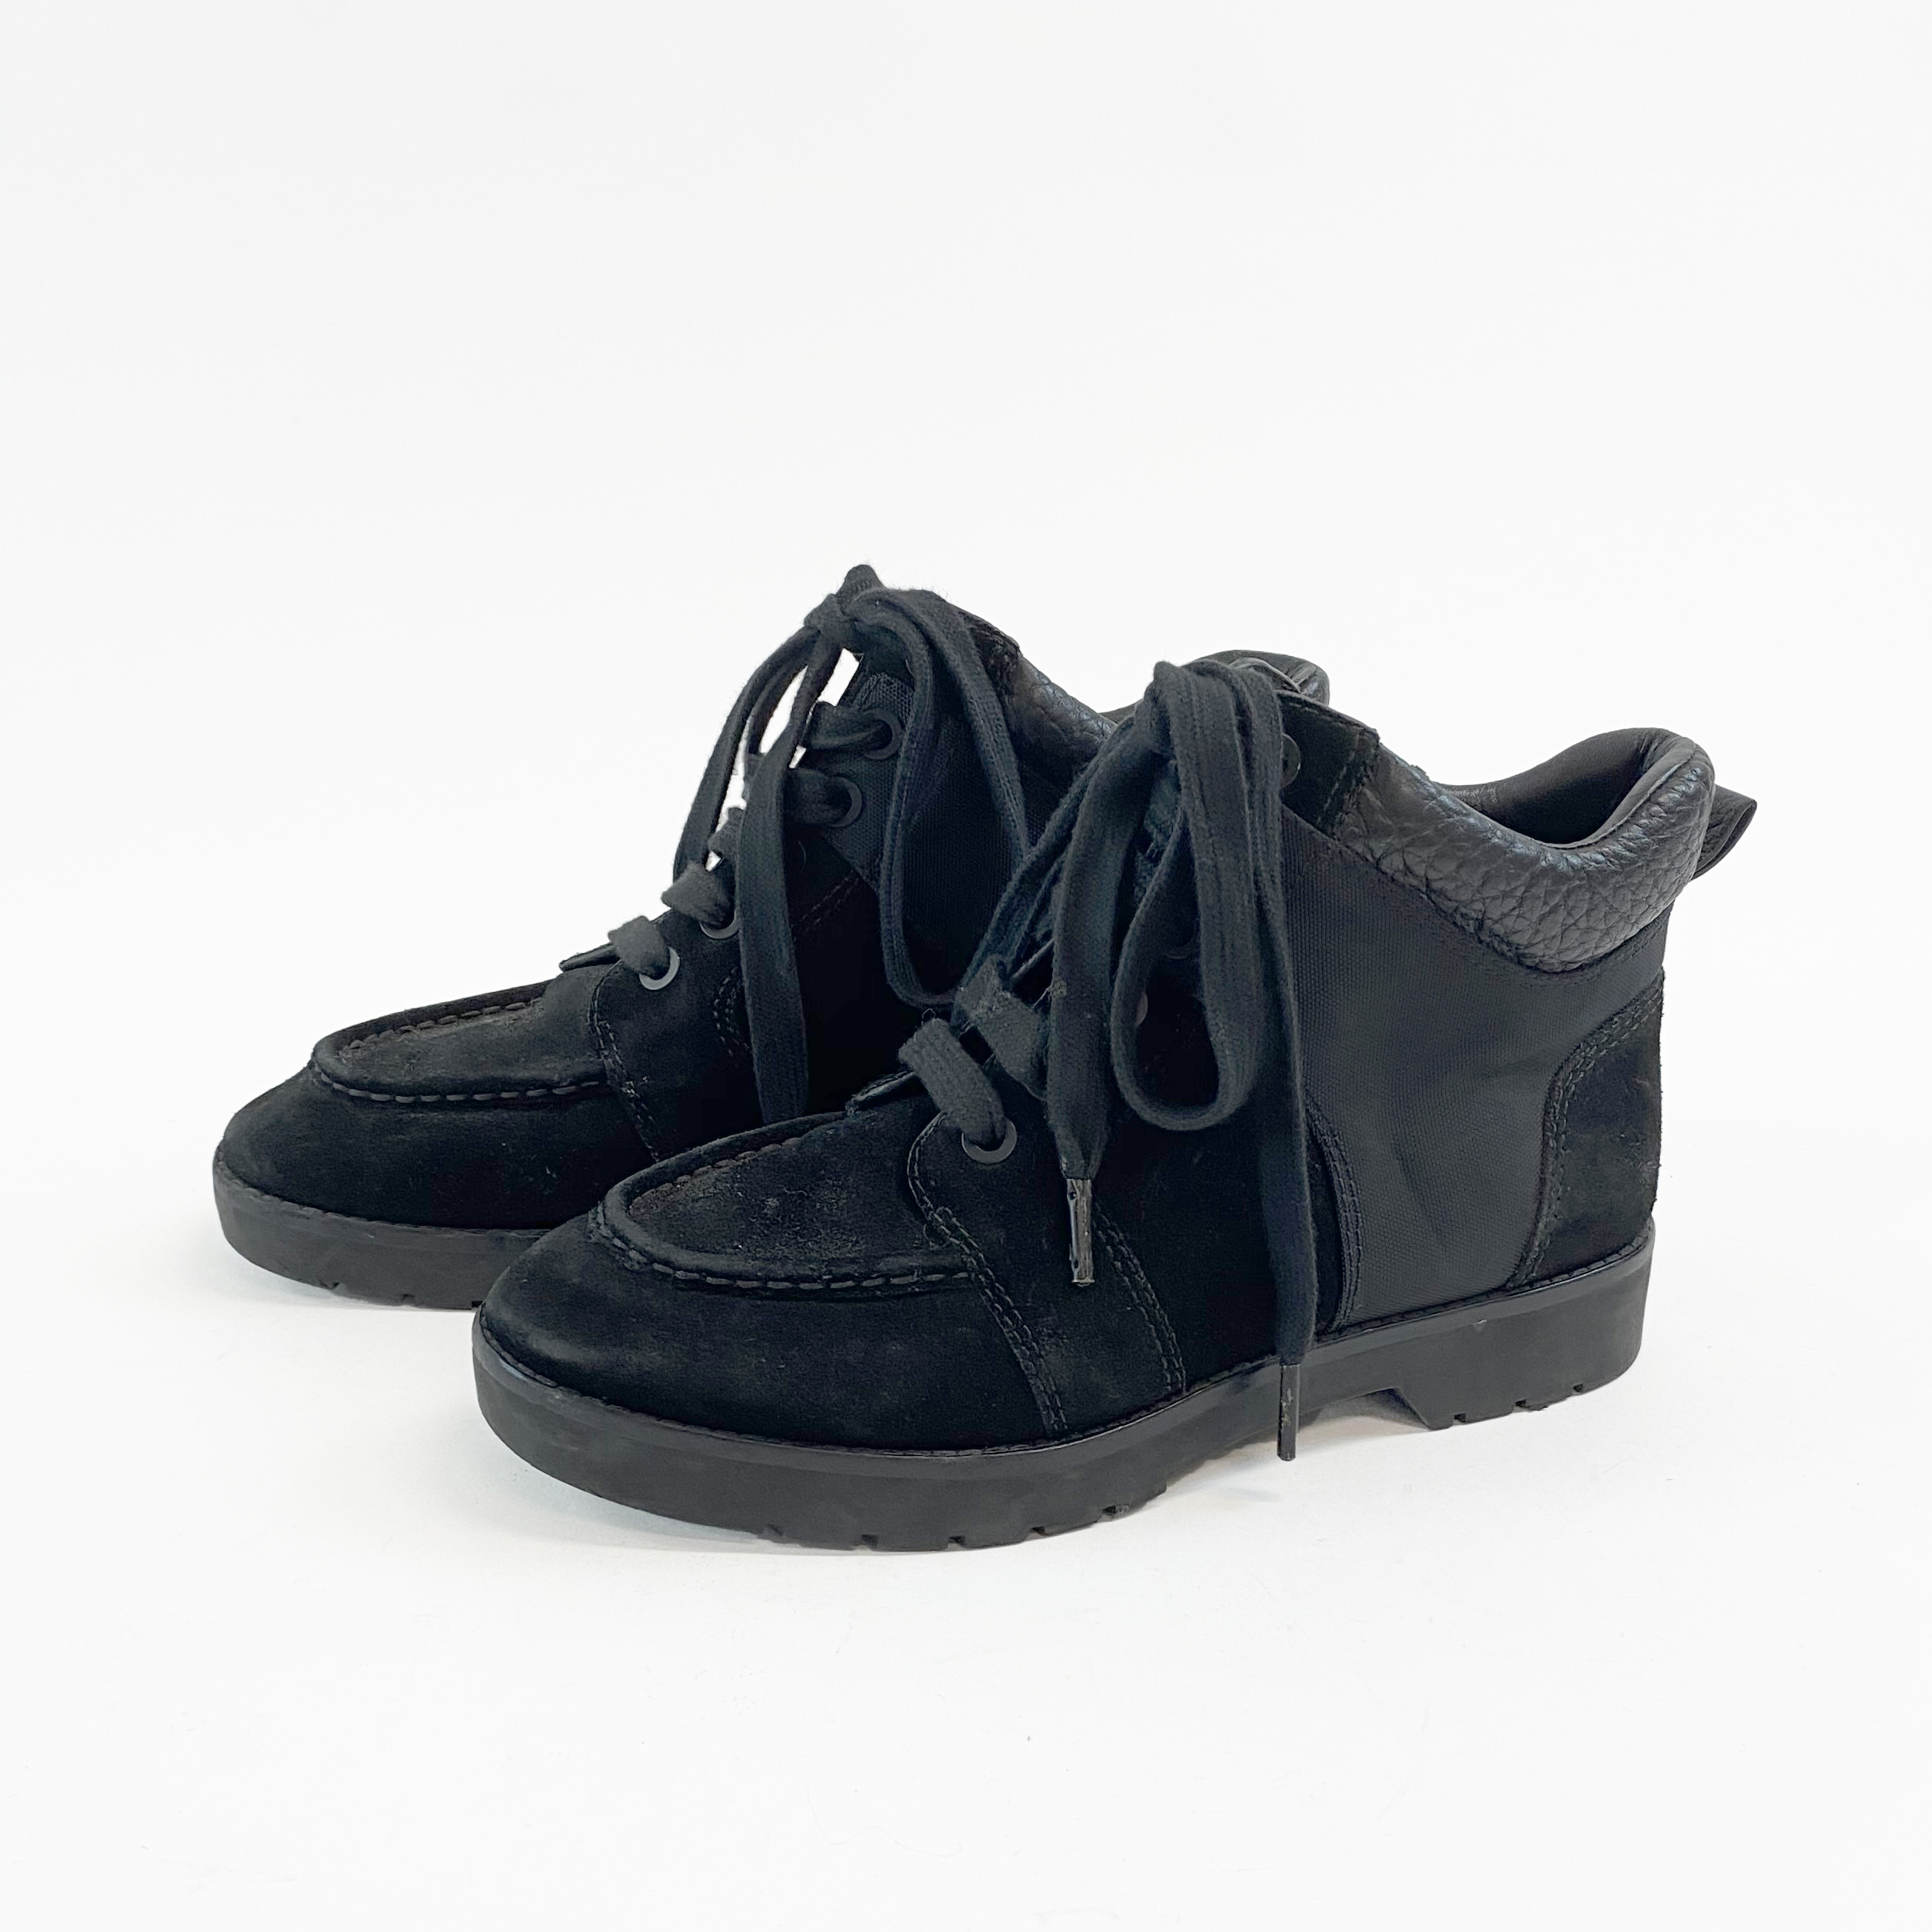 Alexander Wang Leather/Suede Ankle Boots